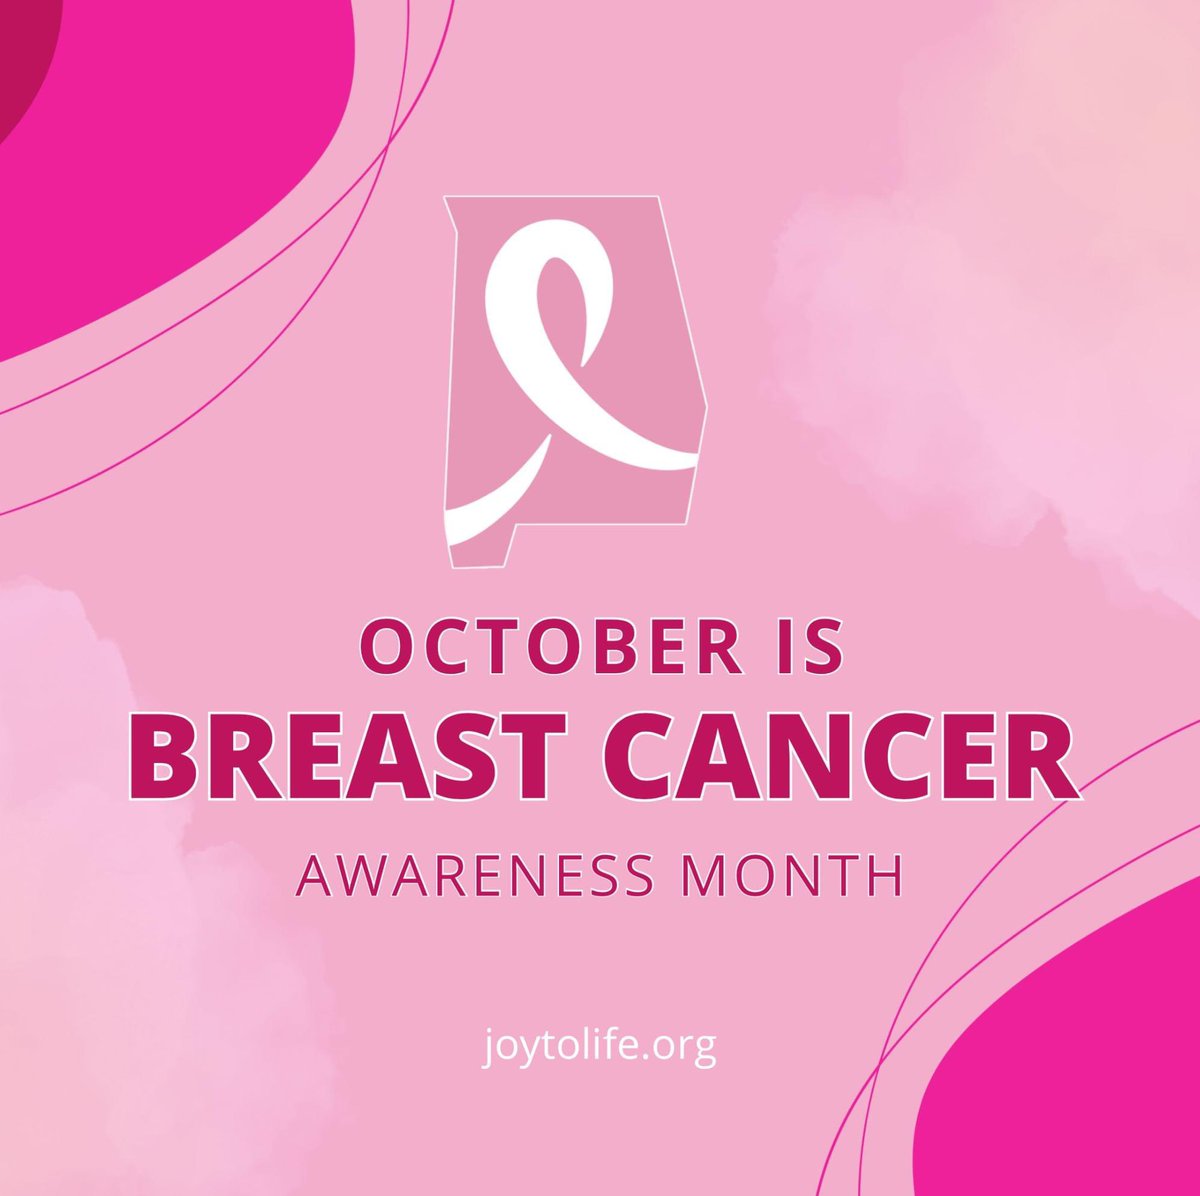 October is Breast Cancer Awareness Month! Visit the Joy to Life website (joytolife.org) to find out more about breast health as well as download some free breast health resources (including how to perform a proper breast self exam). Early detection saves lives!